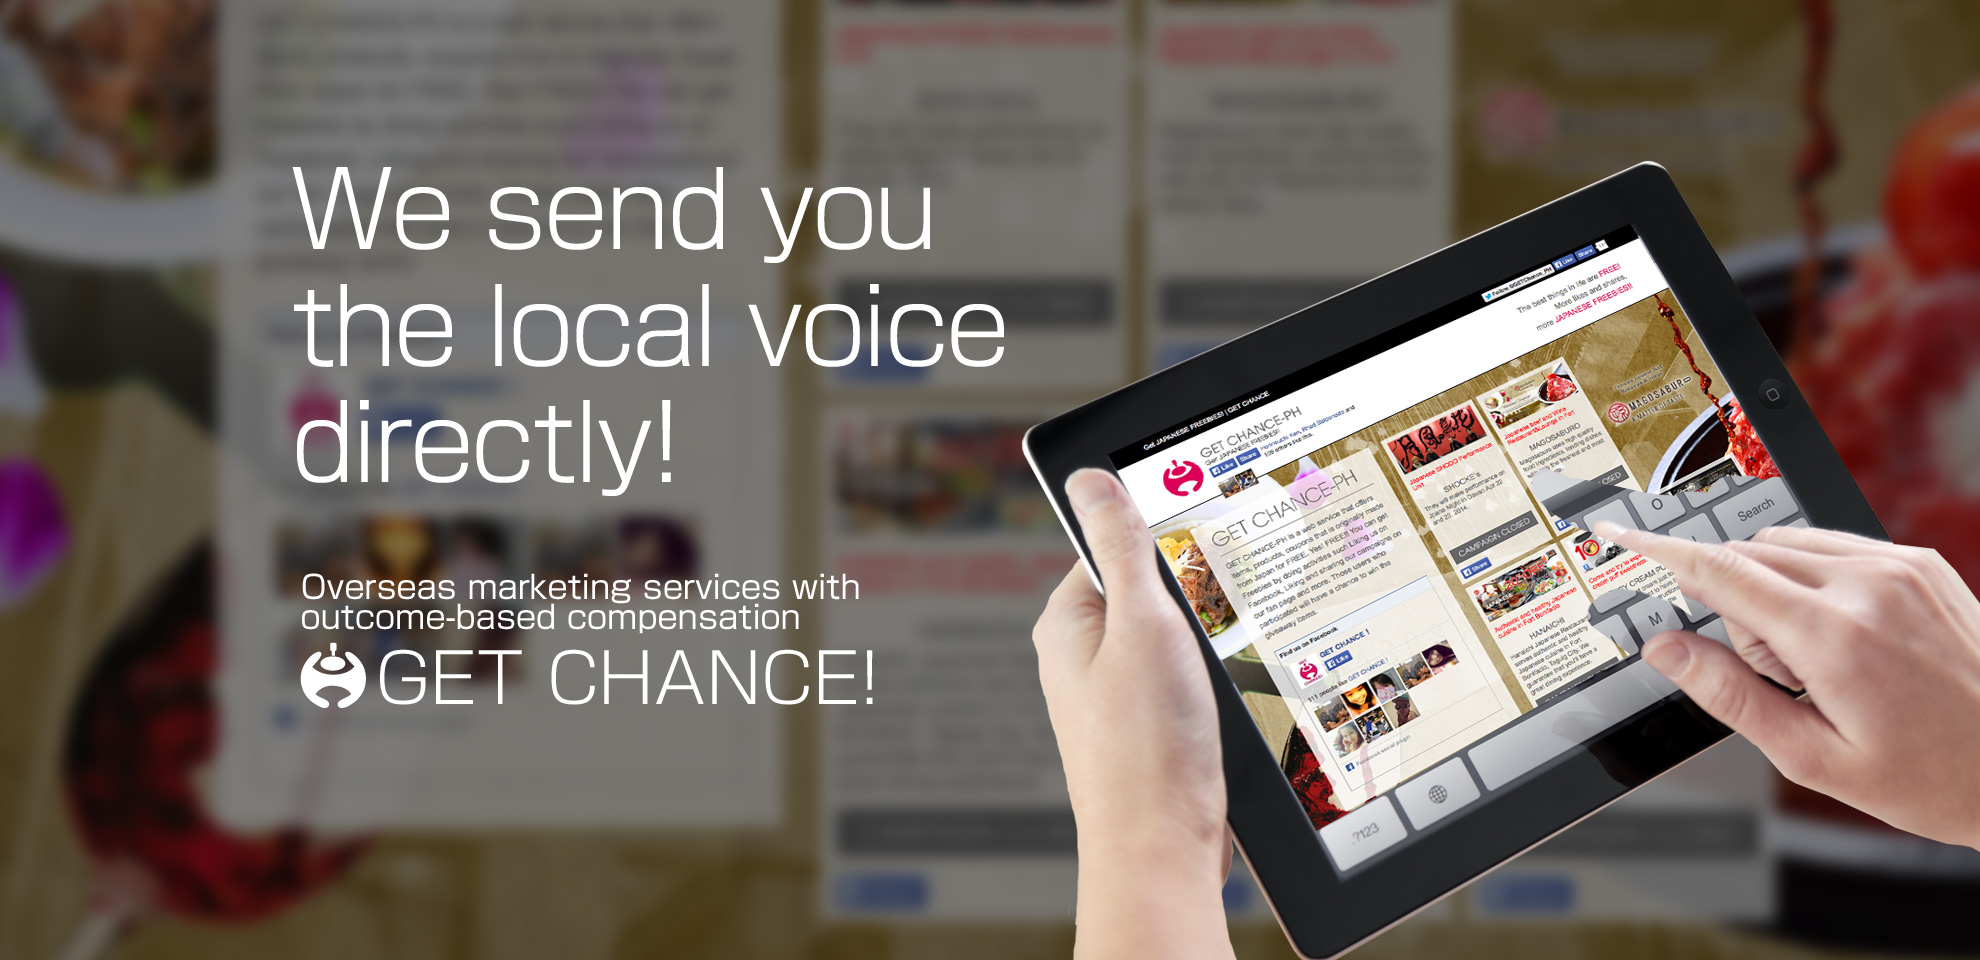 We send you the local voice directly! - Overseas marketing services with outcome-based compensation GET CHANCE!